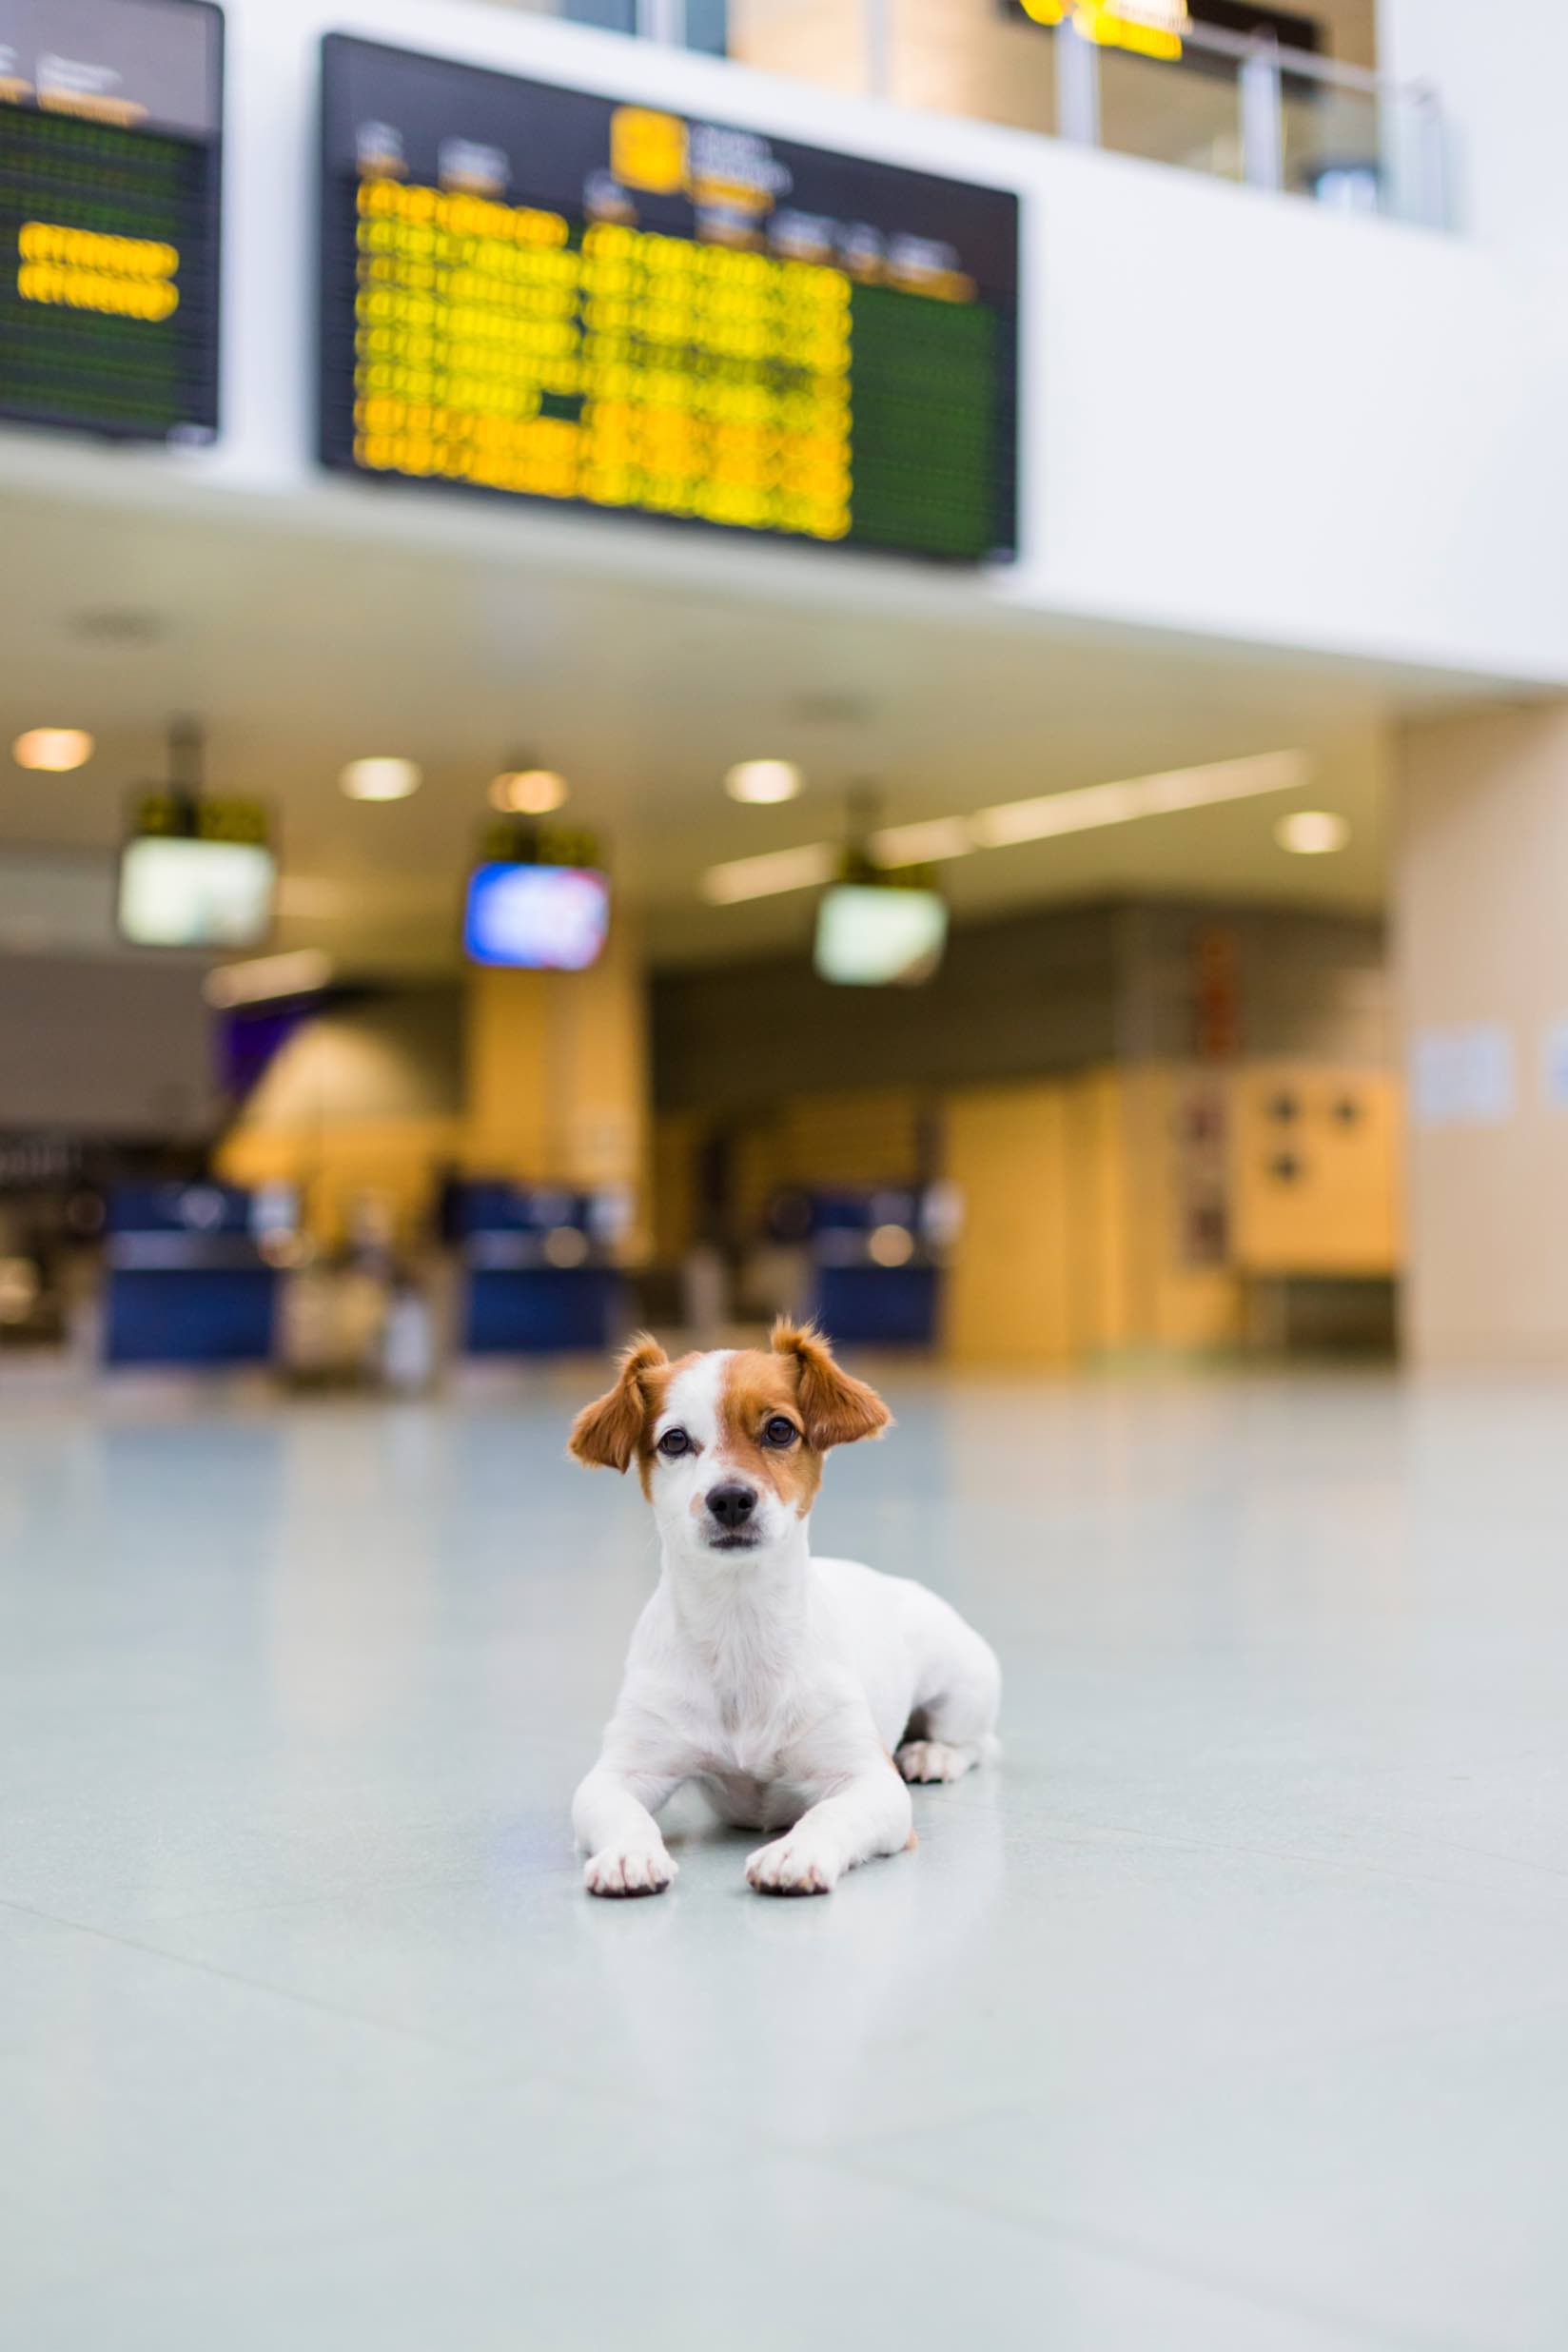 This pup is happy to behave at the airport, especially thanks to training from Dog Training Elite in Des Moines.